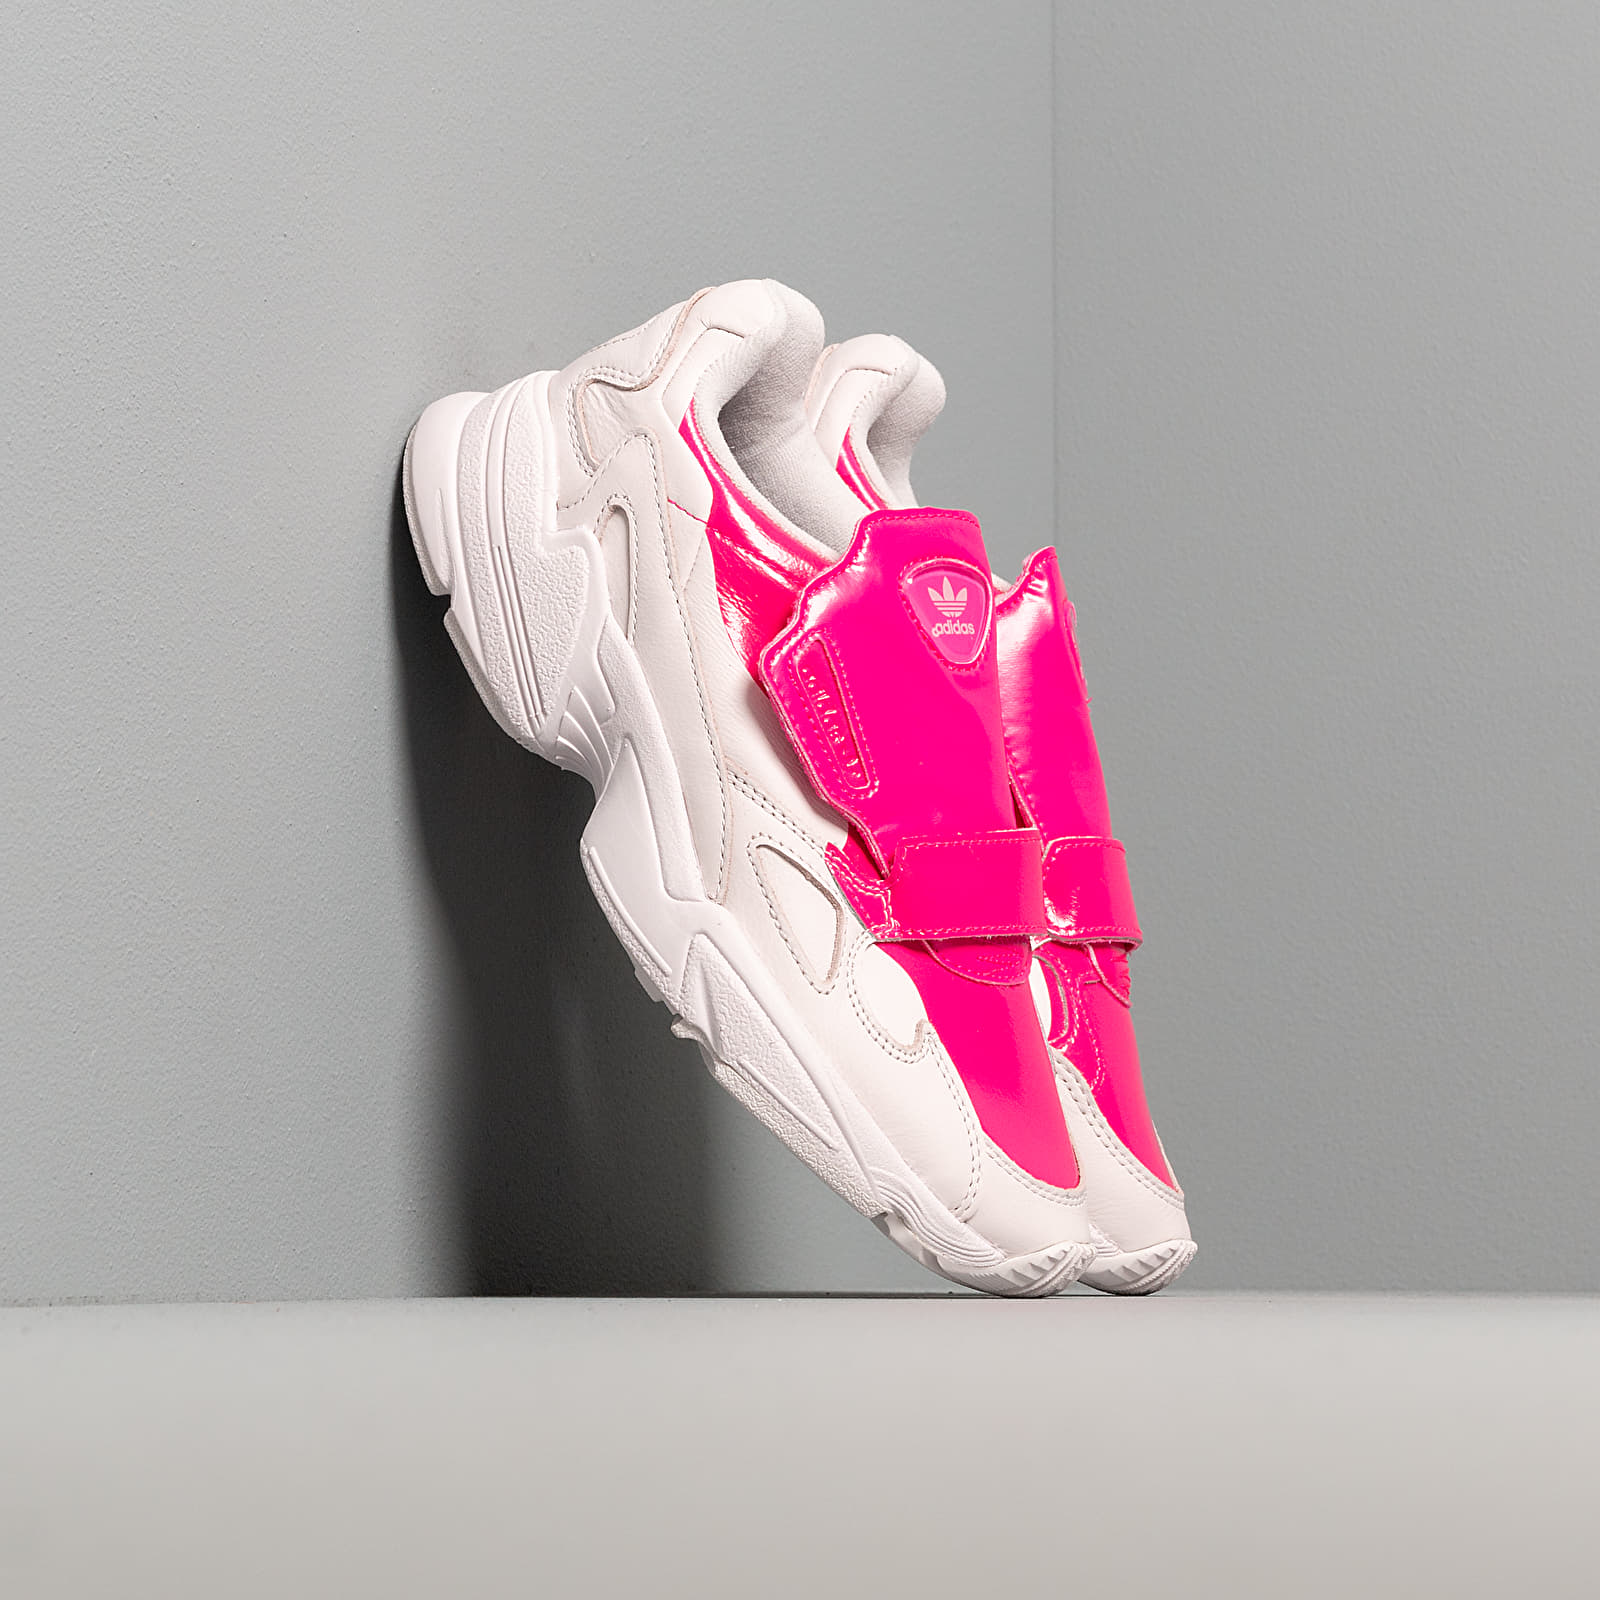 Chaussures et baskets femme adidas Falcon Rx W Shock Pink/ Shock Pink/ Orchid Tint